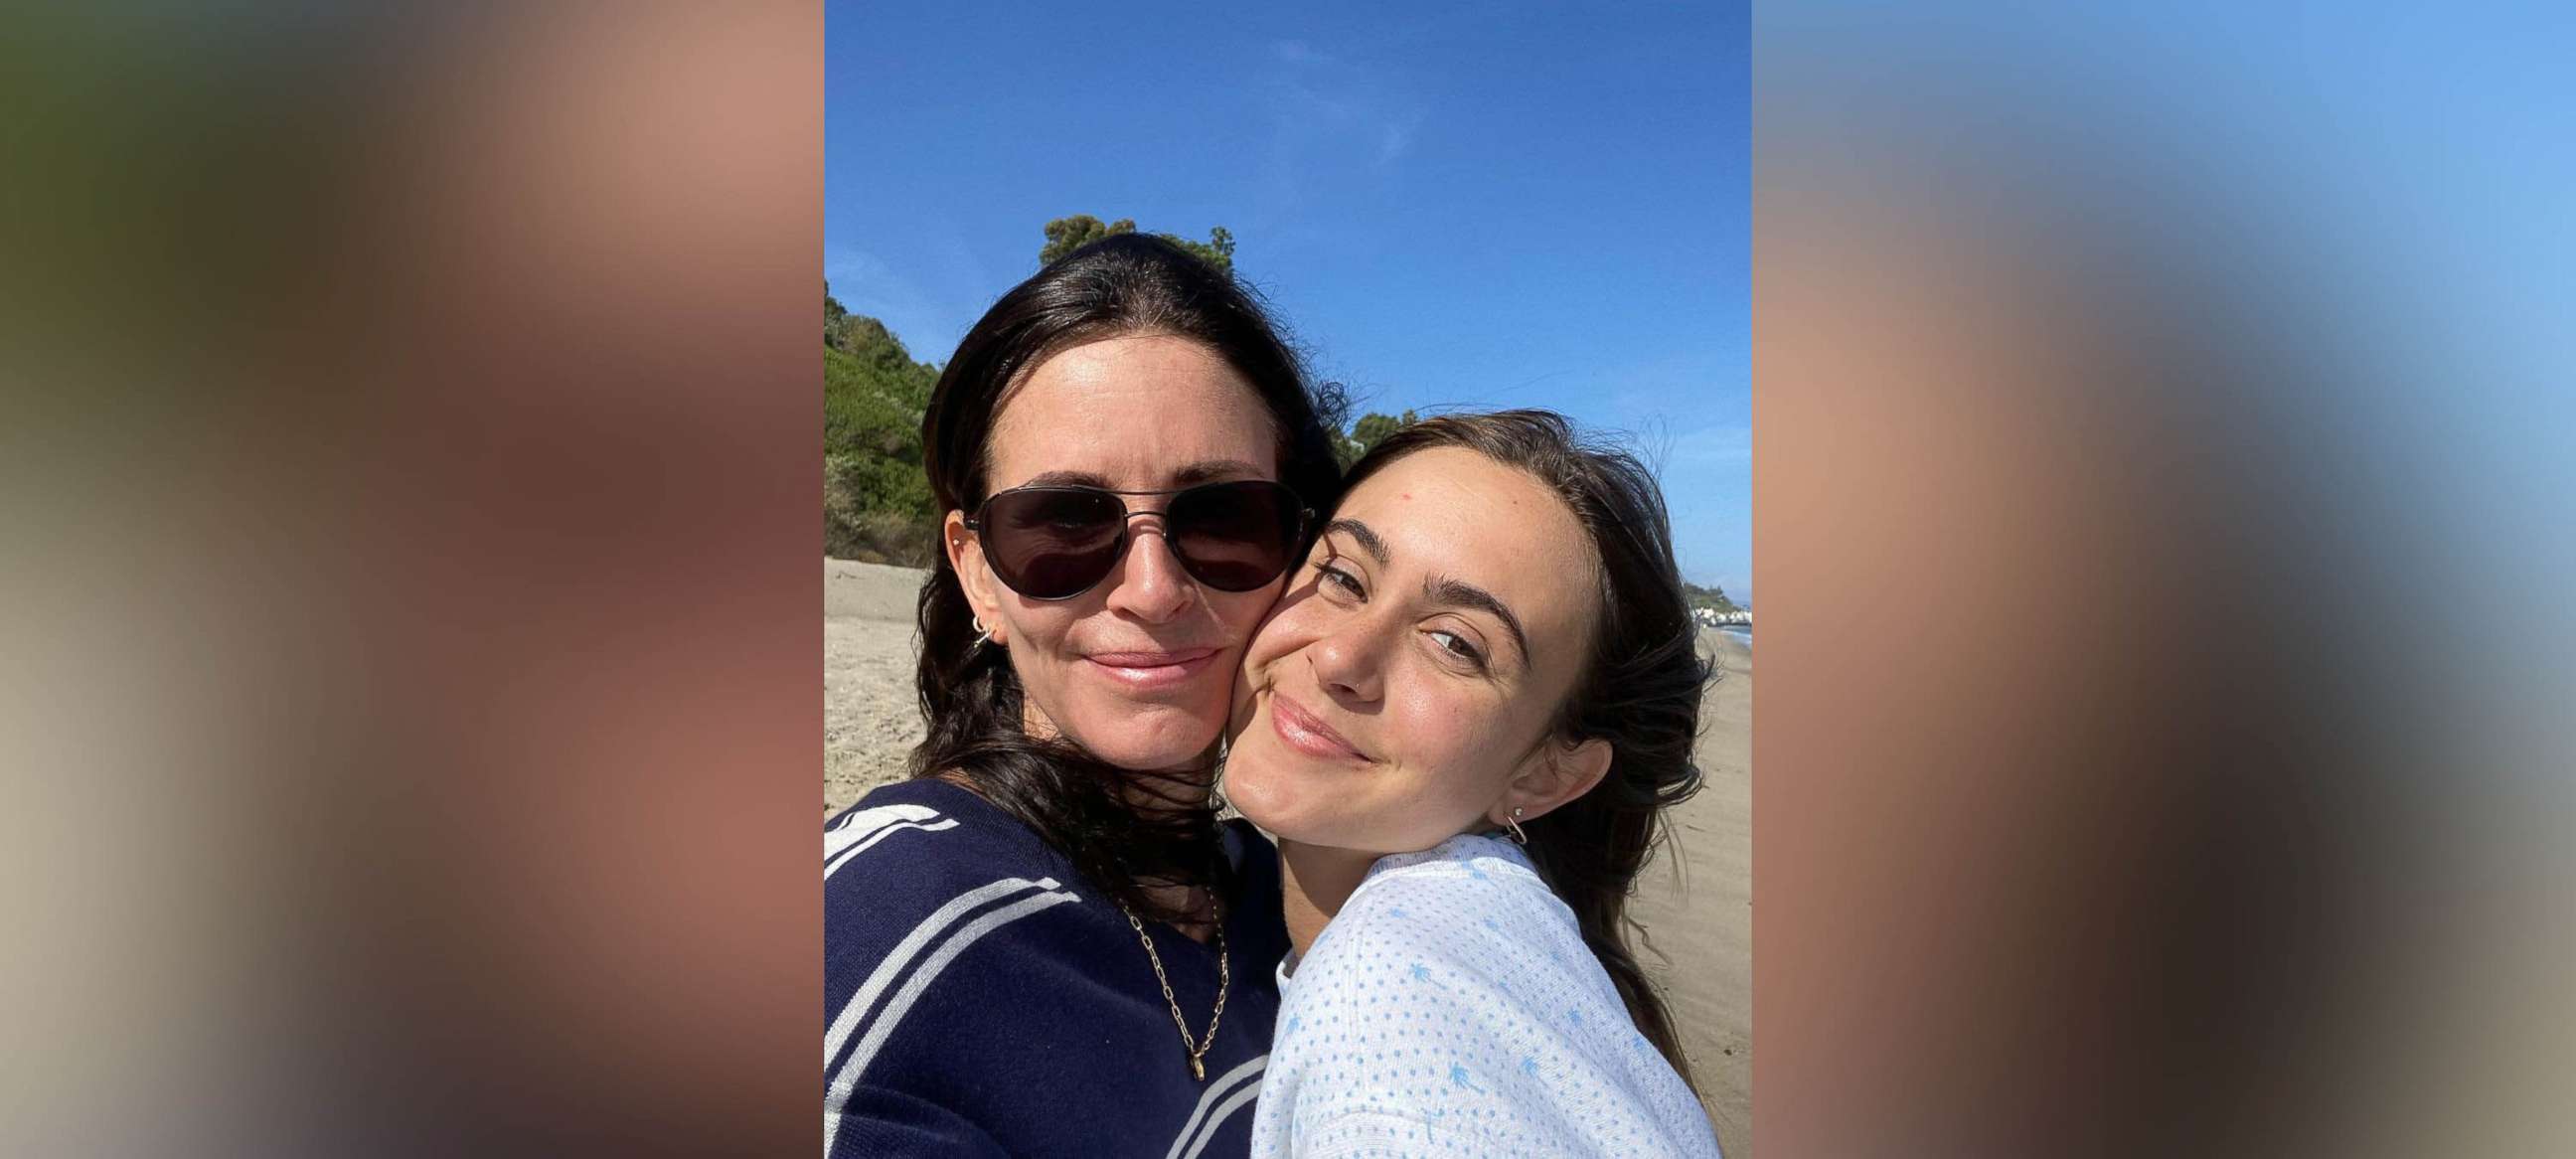 PHOTO: Courteney Cox embraces her daughter Alexis Arquette in an image posted to Cox's instagram account celebrating Coco's 18th birthday on June 14, 2022.